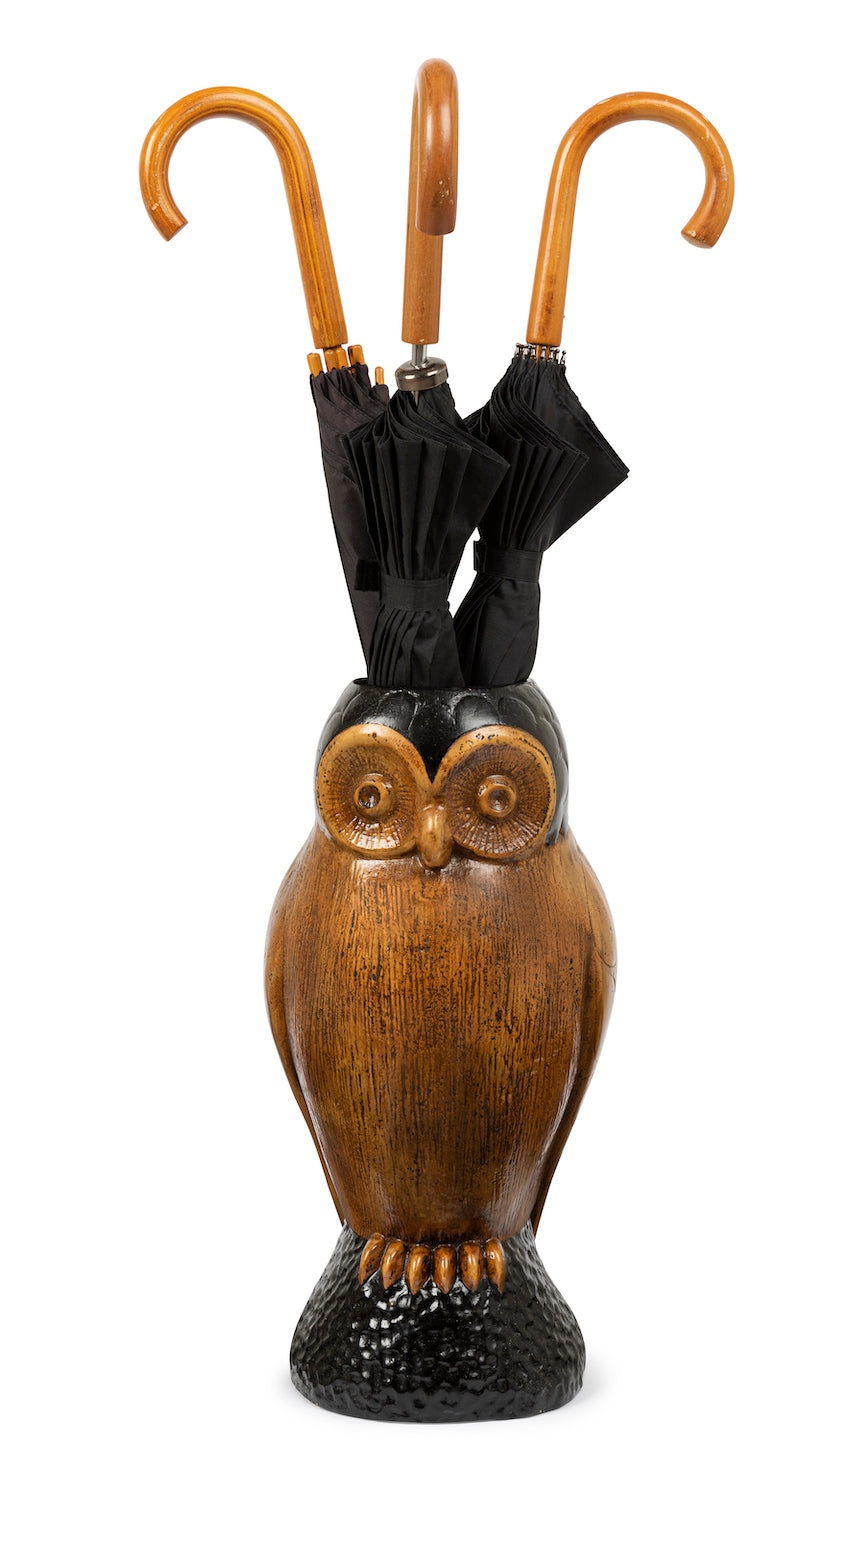 SOLD An unusual vintage French umbrella stand in the form of an owl